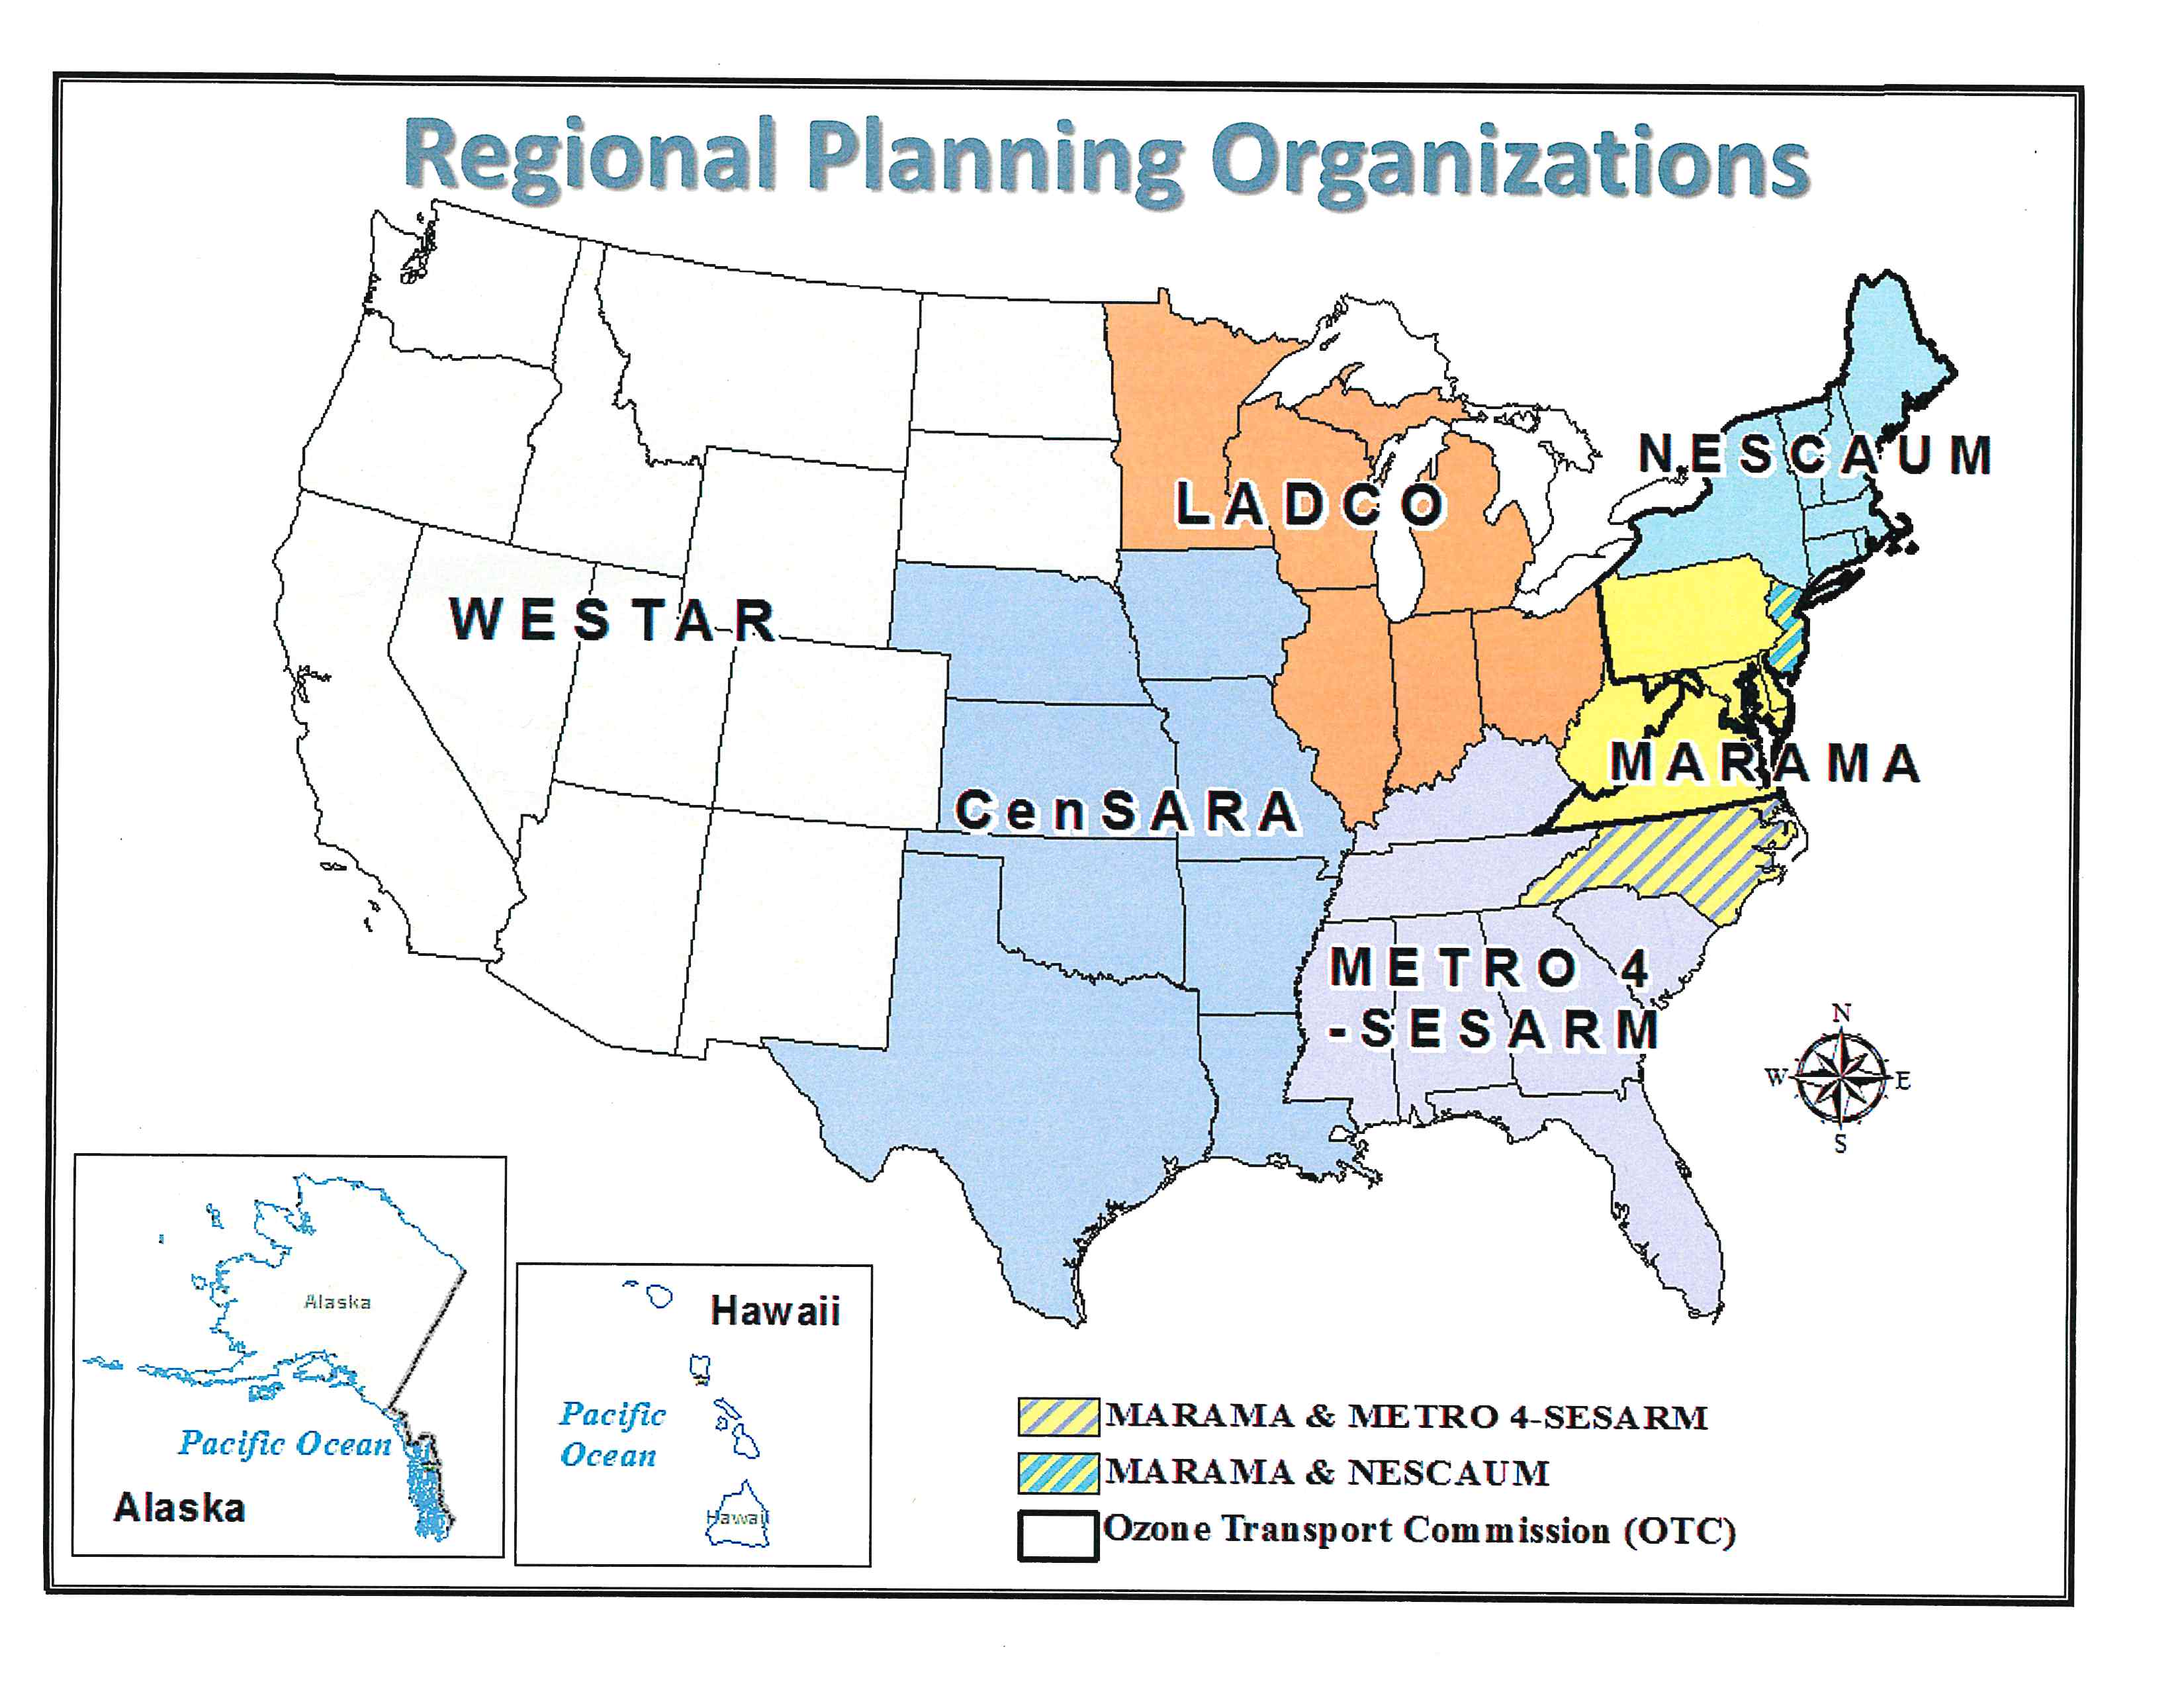 Unites States map showing the geographical areas of six regional planning organizations.